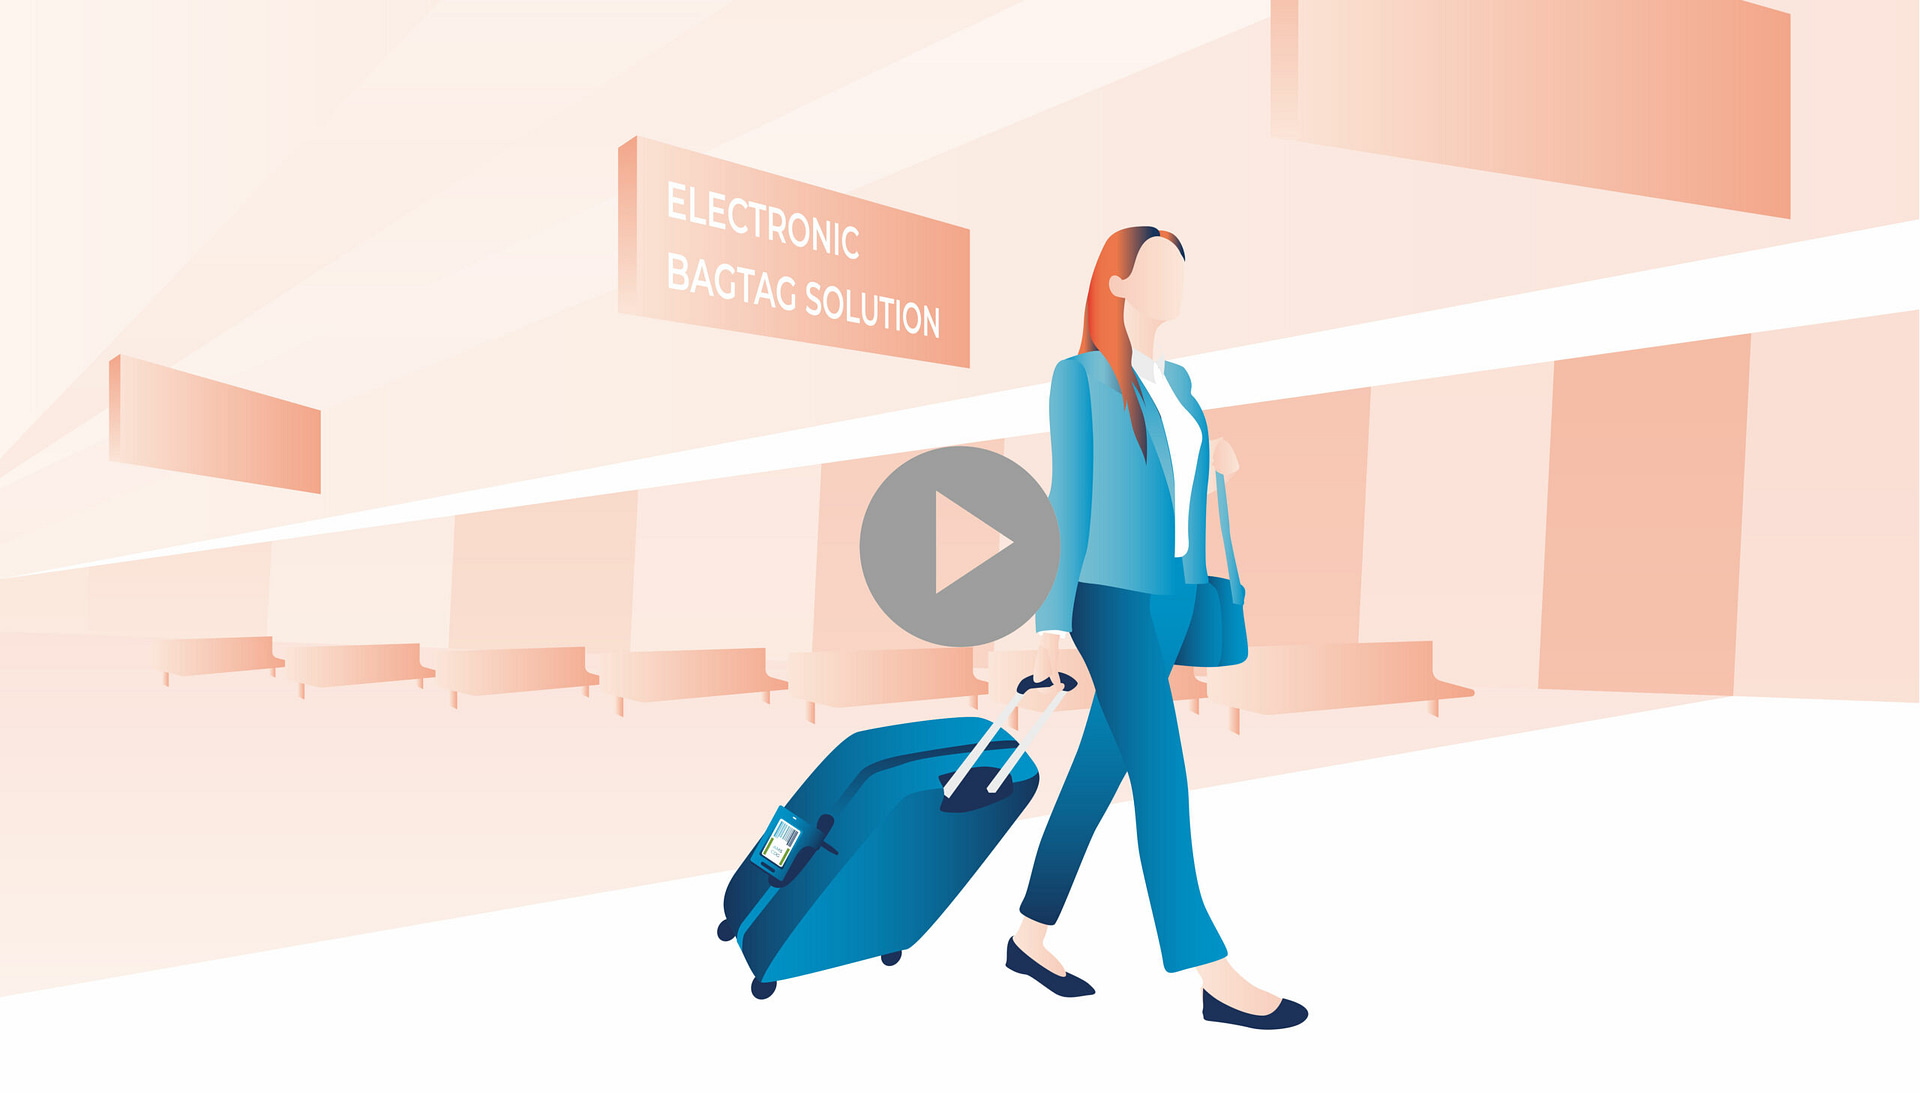 Electronic luggage tag lets travelers check-in bags from home